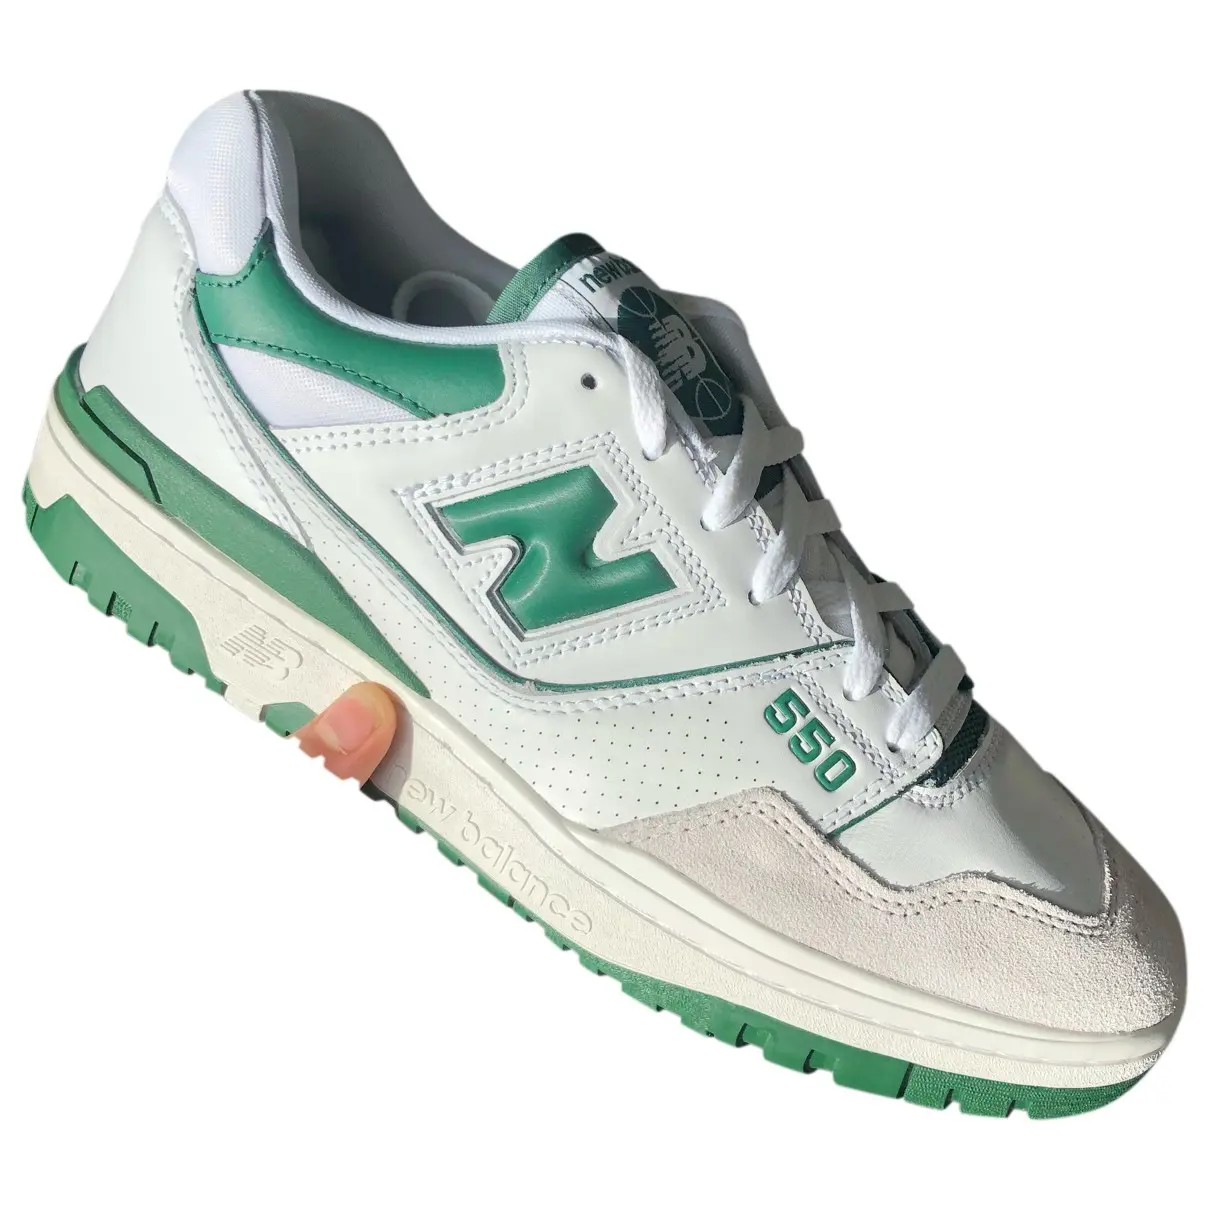 550 leather low trainers New Balance